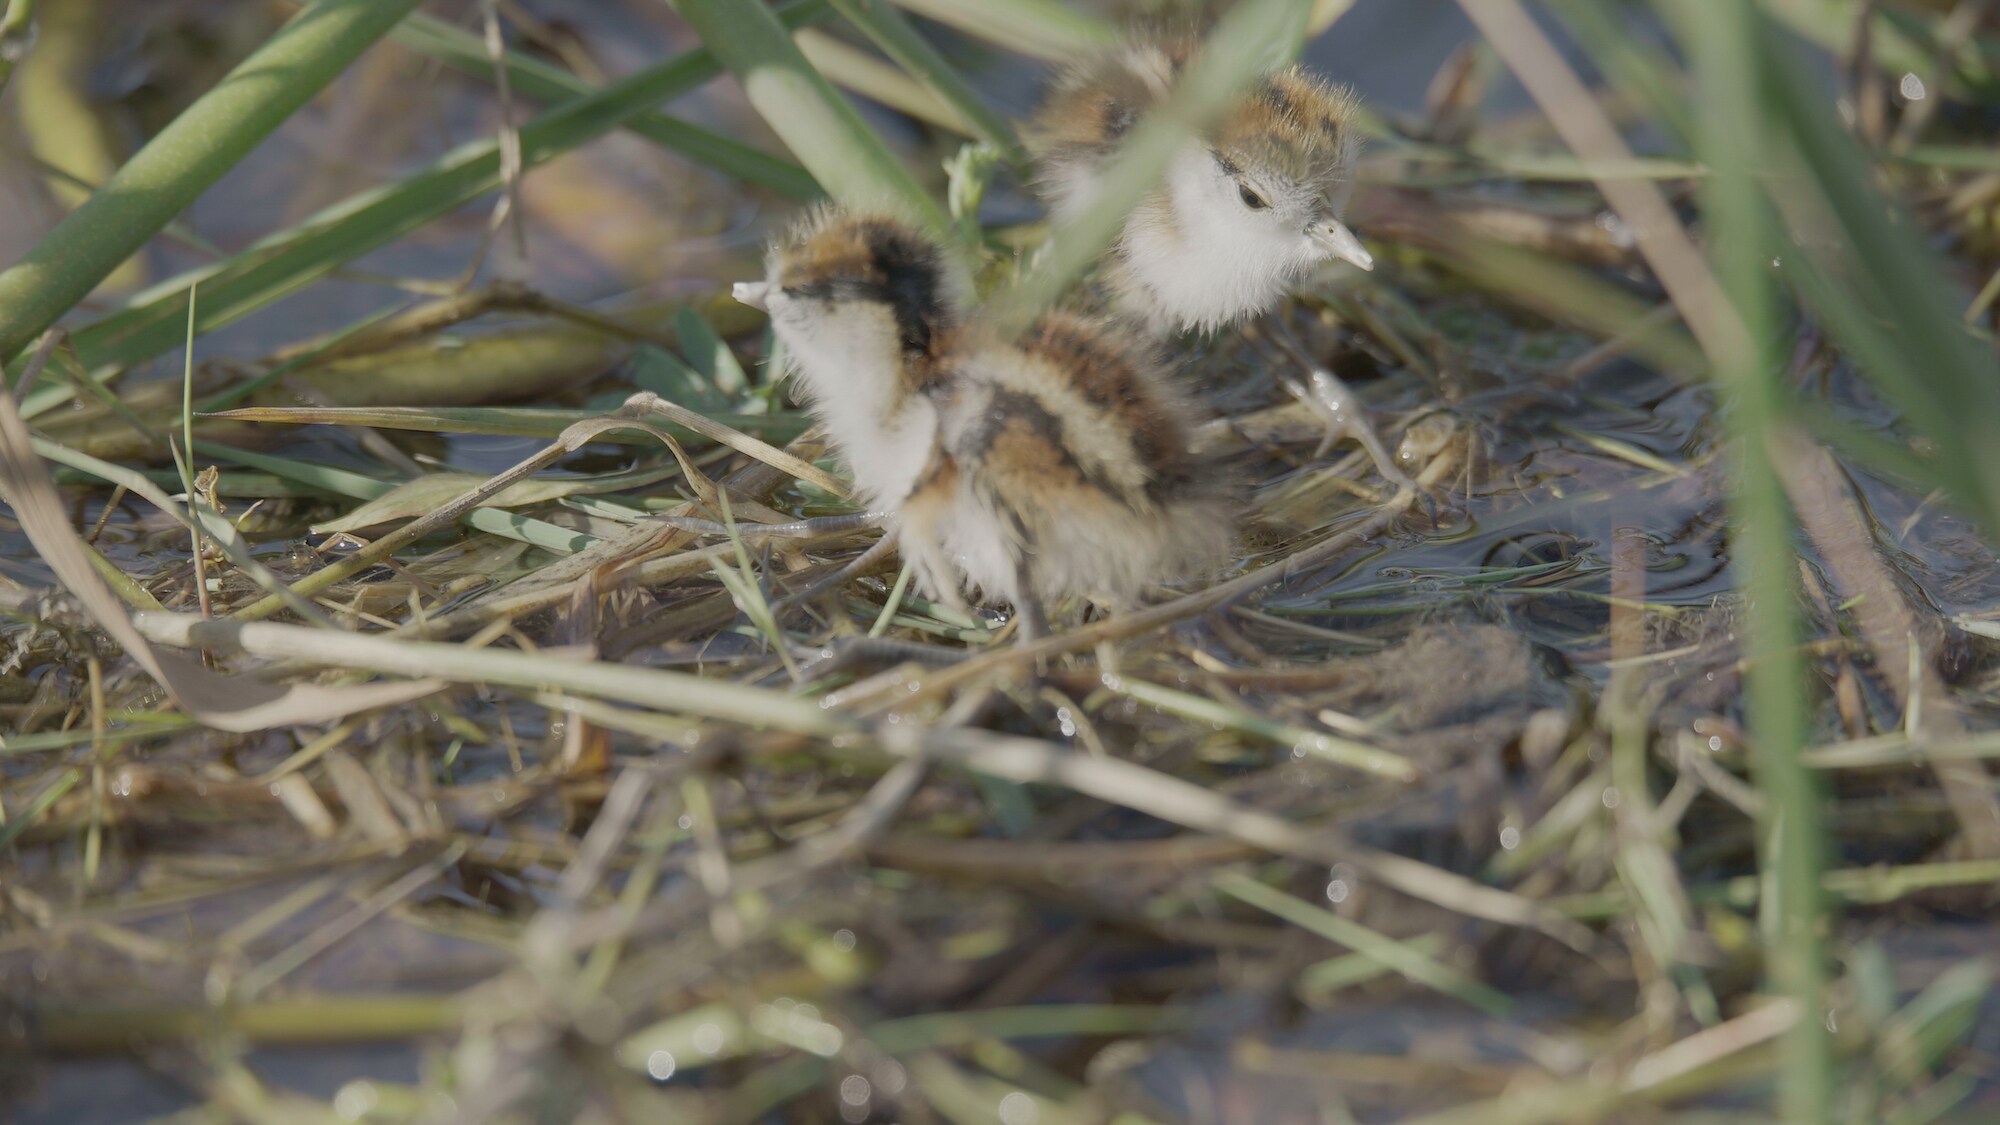 Close up of a baby jacana. (National Geographic for Disney+/Carl Ruysenarr)